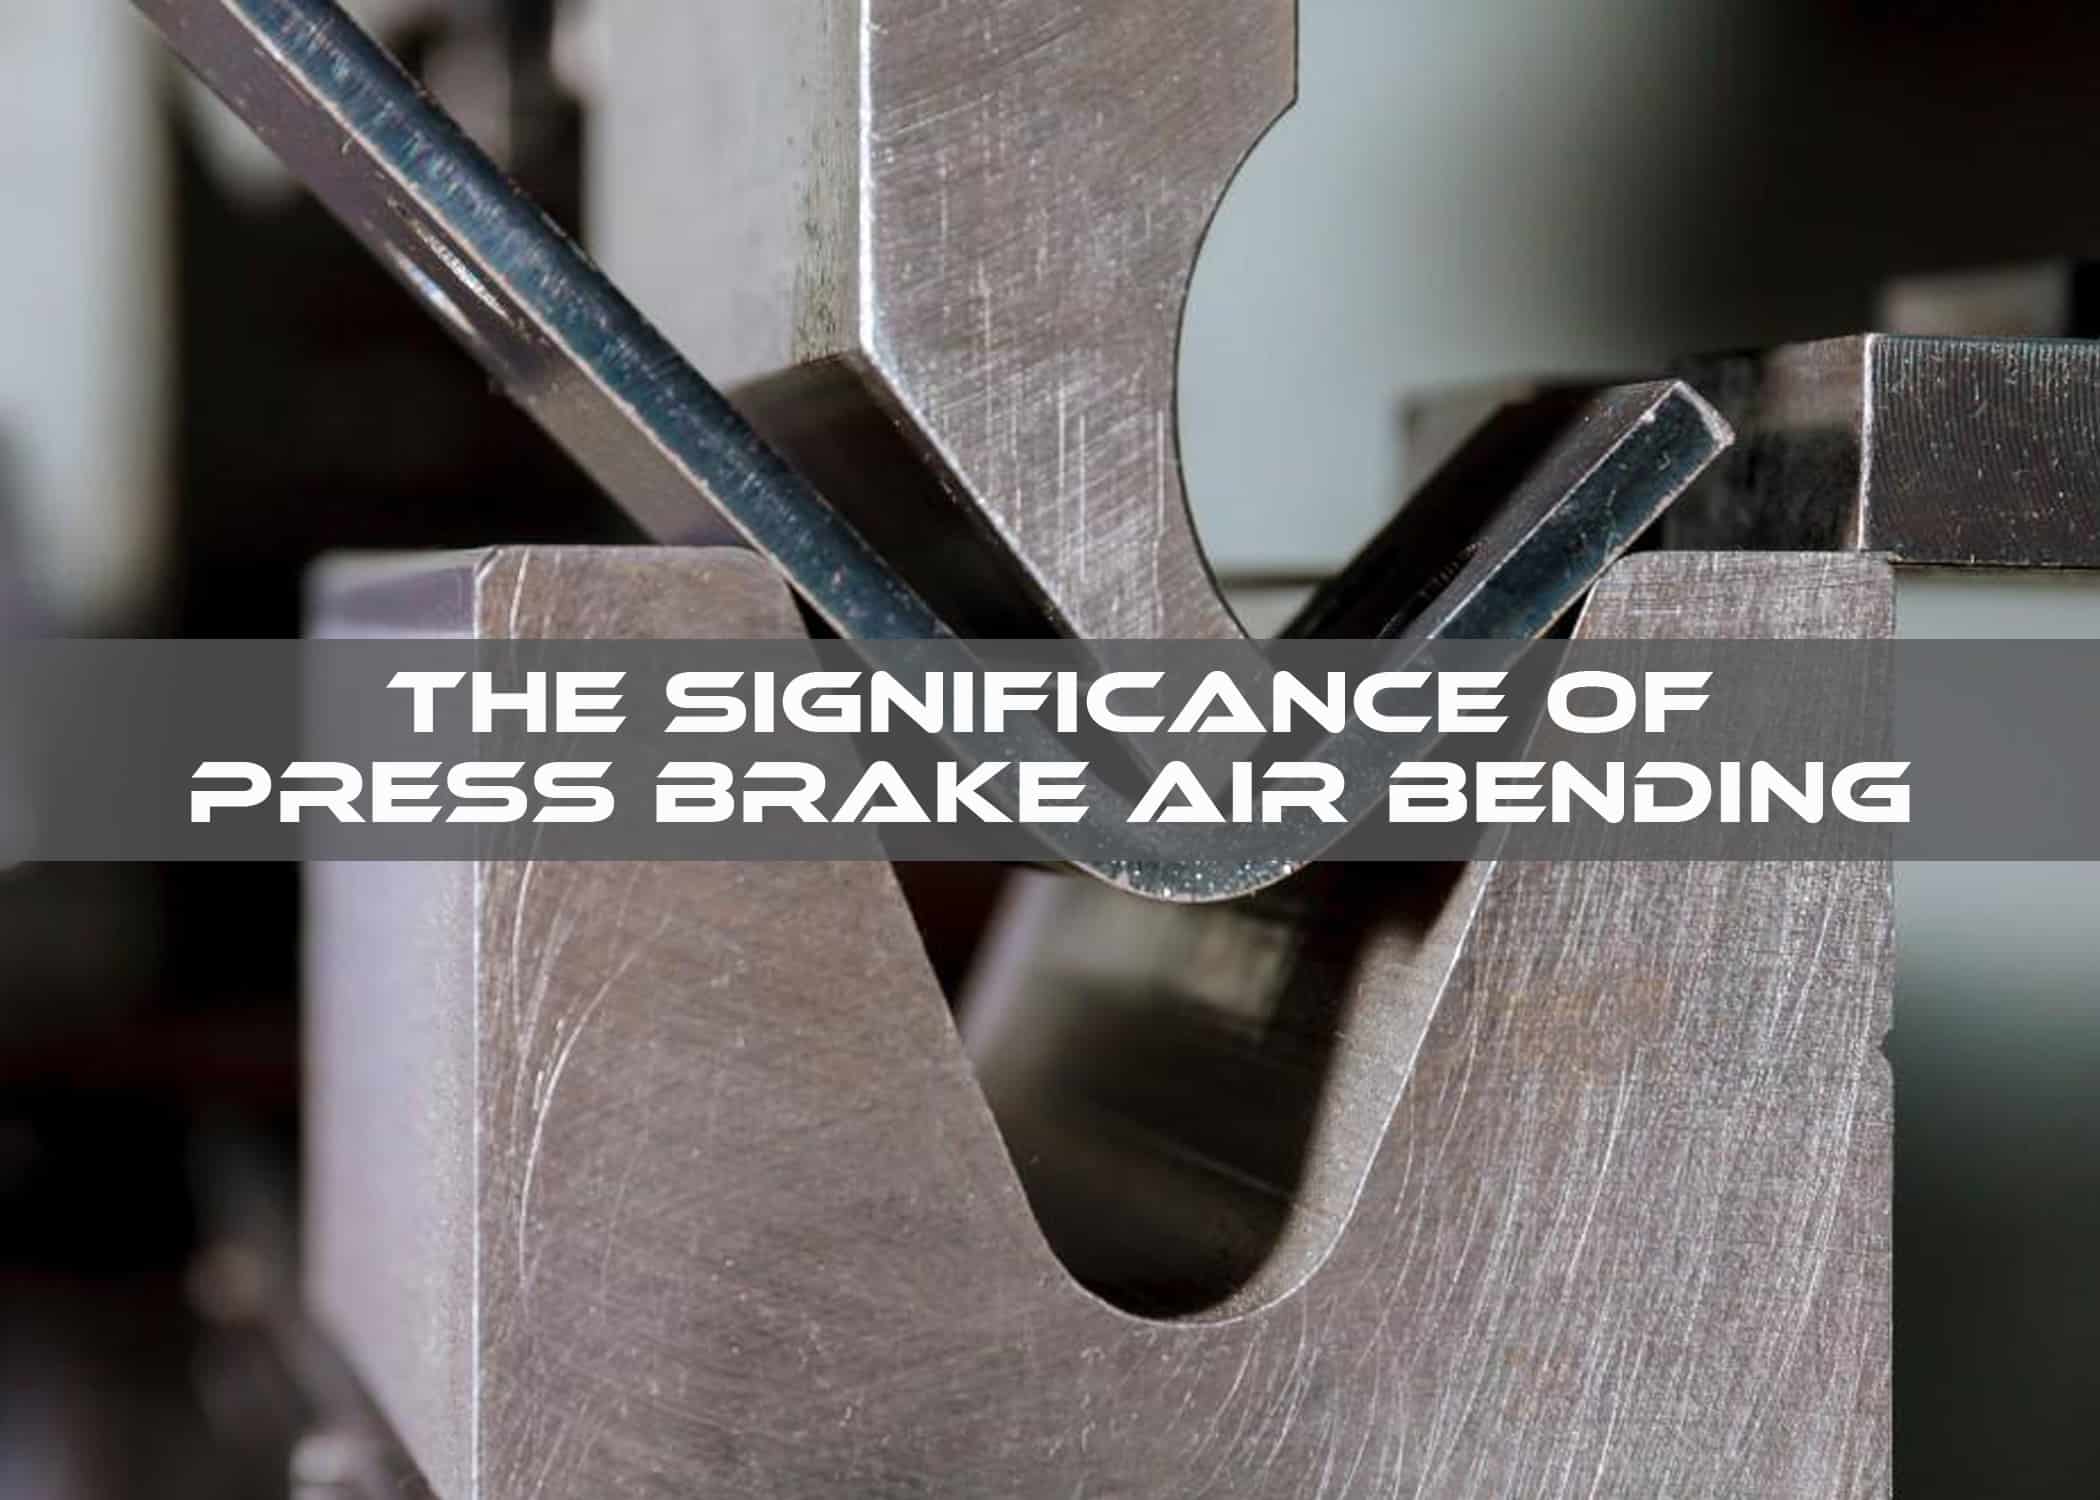 The Significance of Press Brake Air Bending